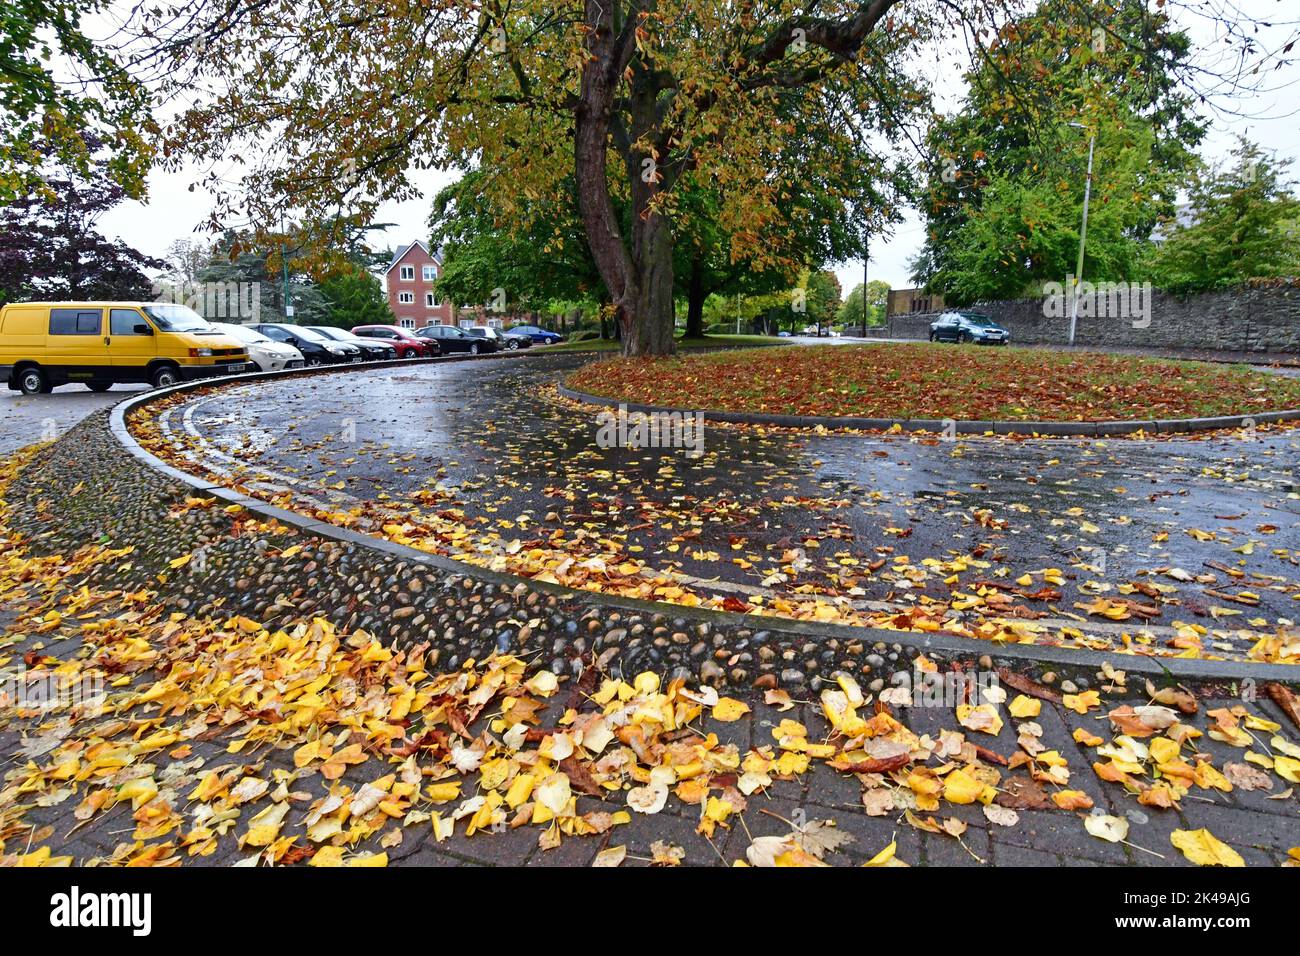 On a damp and wet afternoon in Nailsea , North Somerset in the UK. Fallen leaves in a mass of Golden Colour line the walkway and pathways. Stock Photo